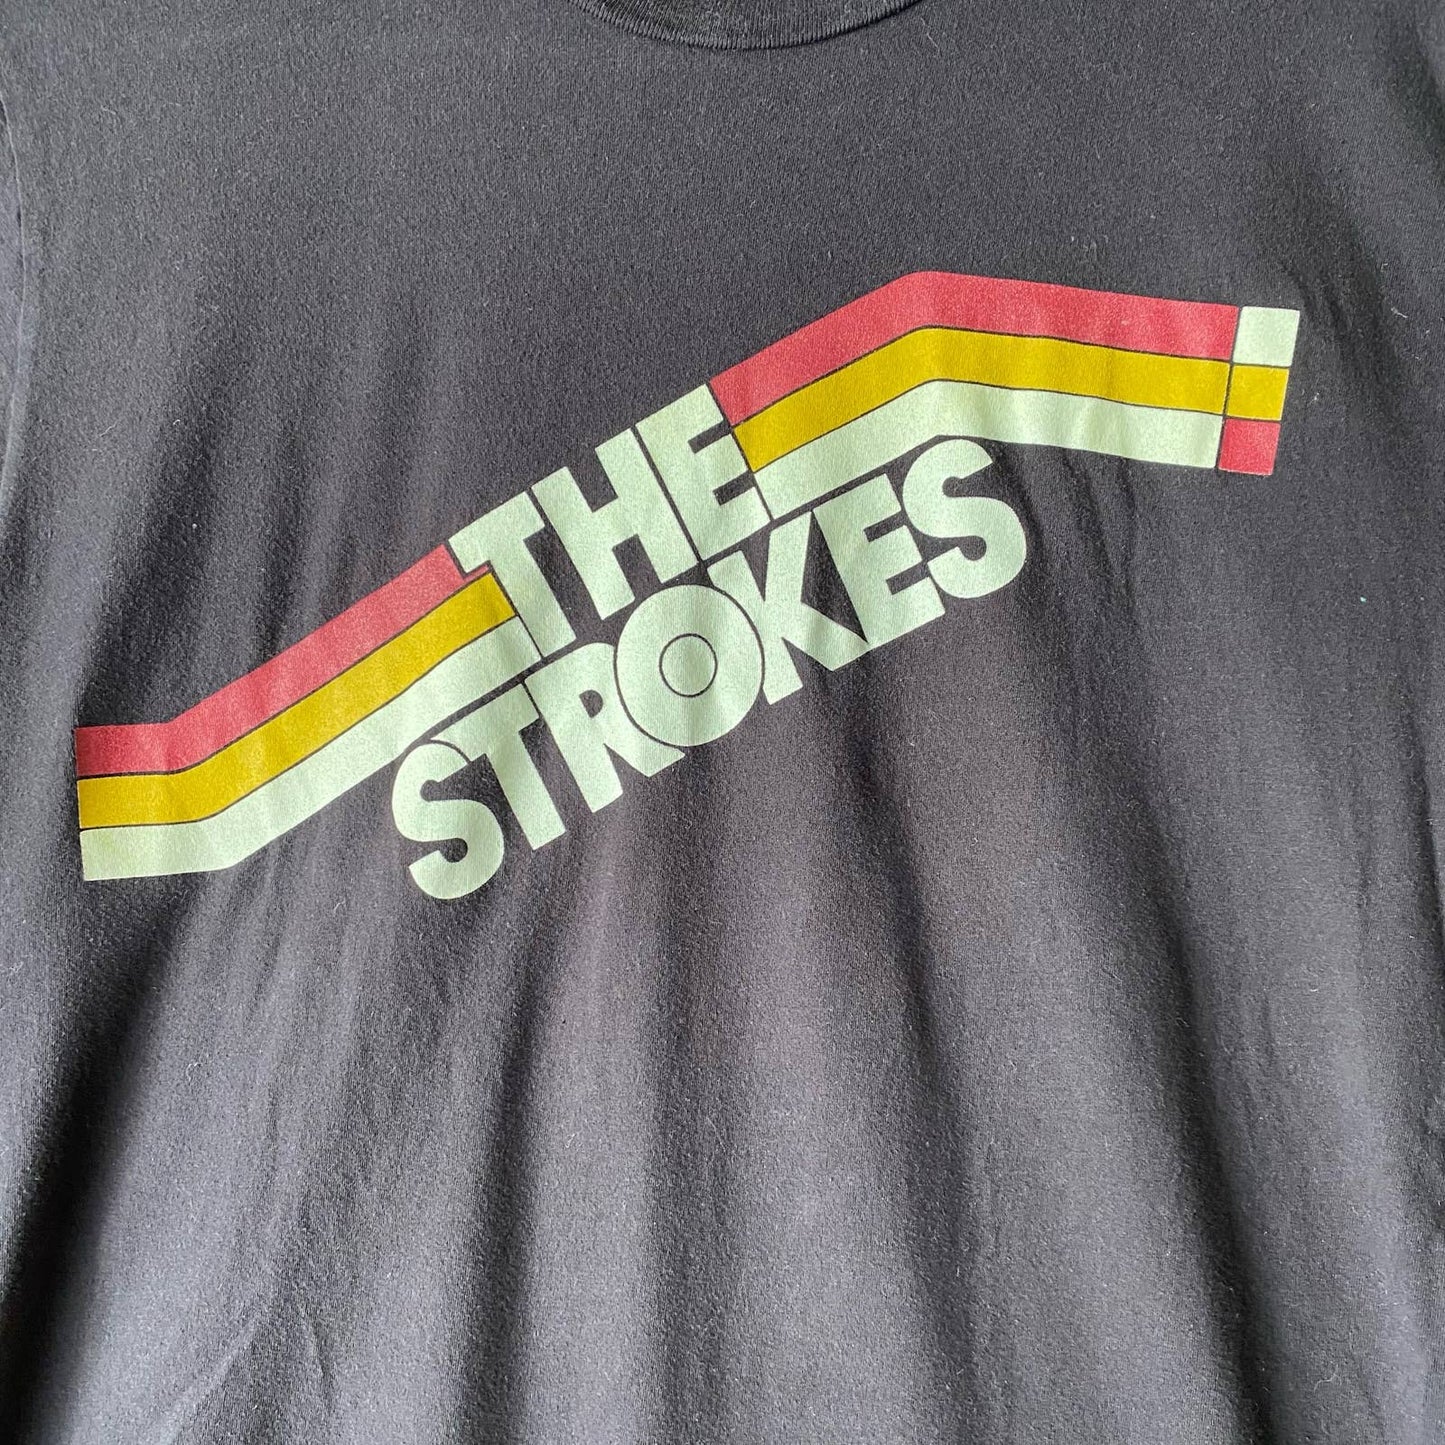 VINTAGE The Strokes sz One size fits all 100% cotton T-shirt